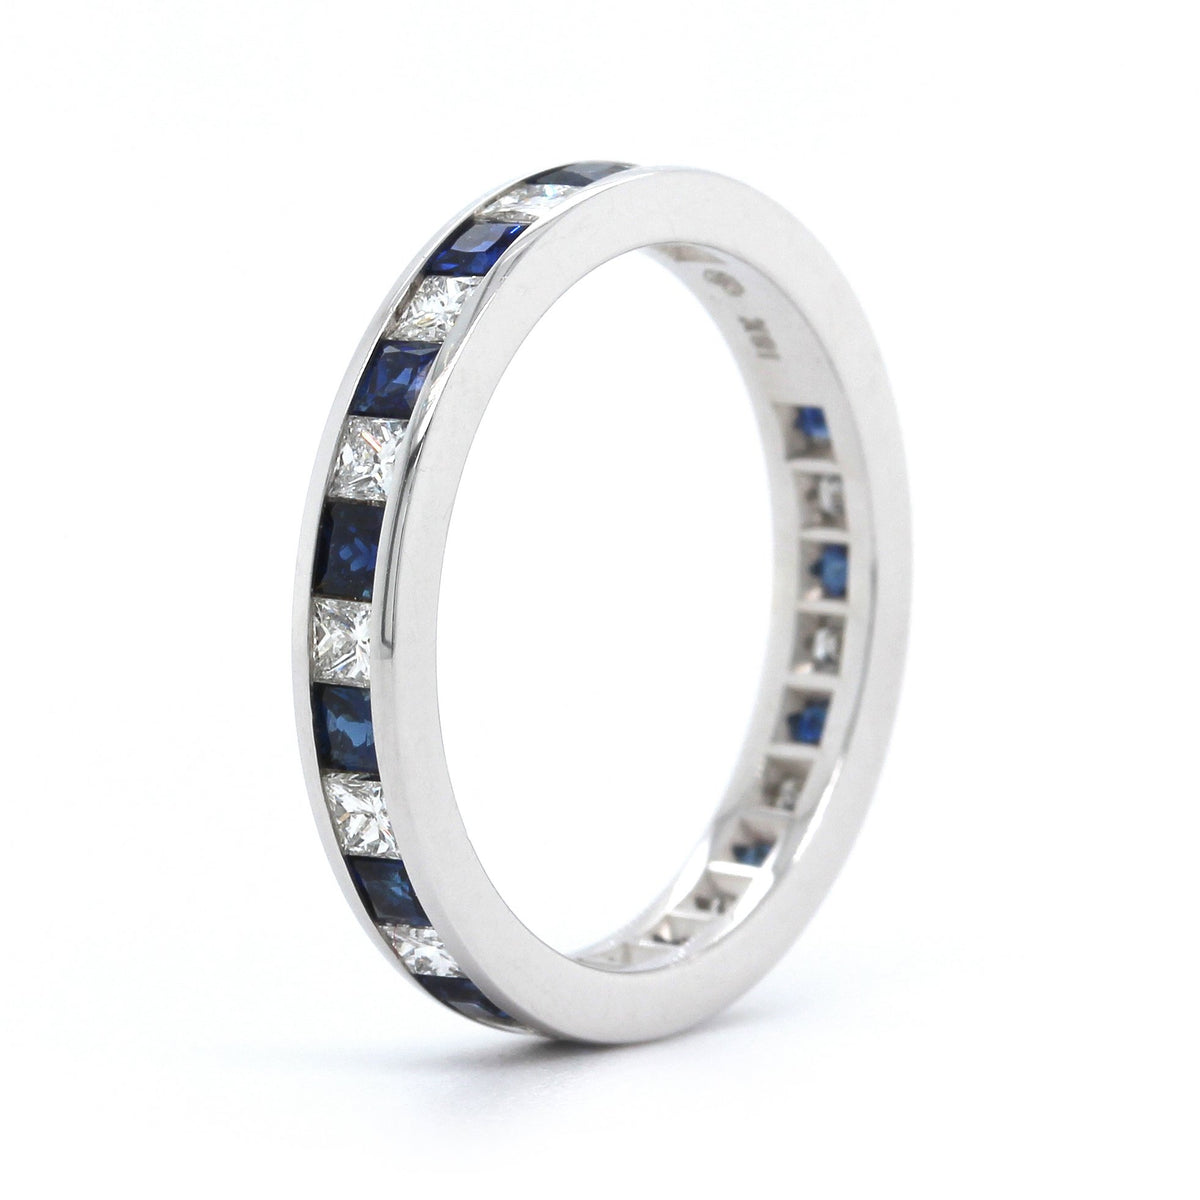 18K White Gold Channel Set Sapphire and Diamond Band